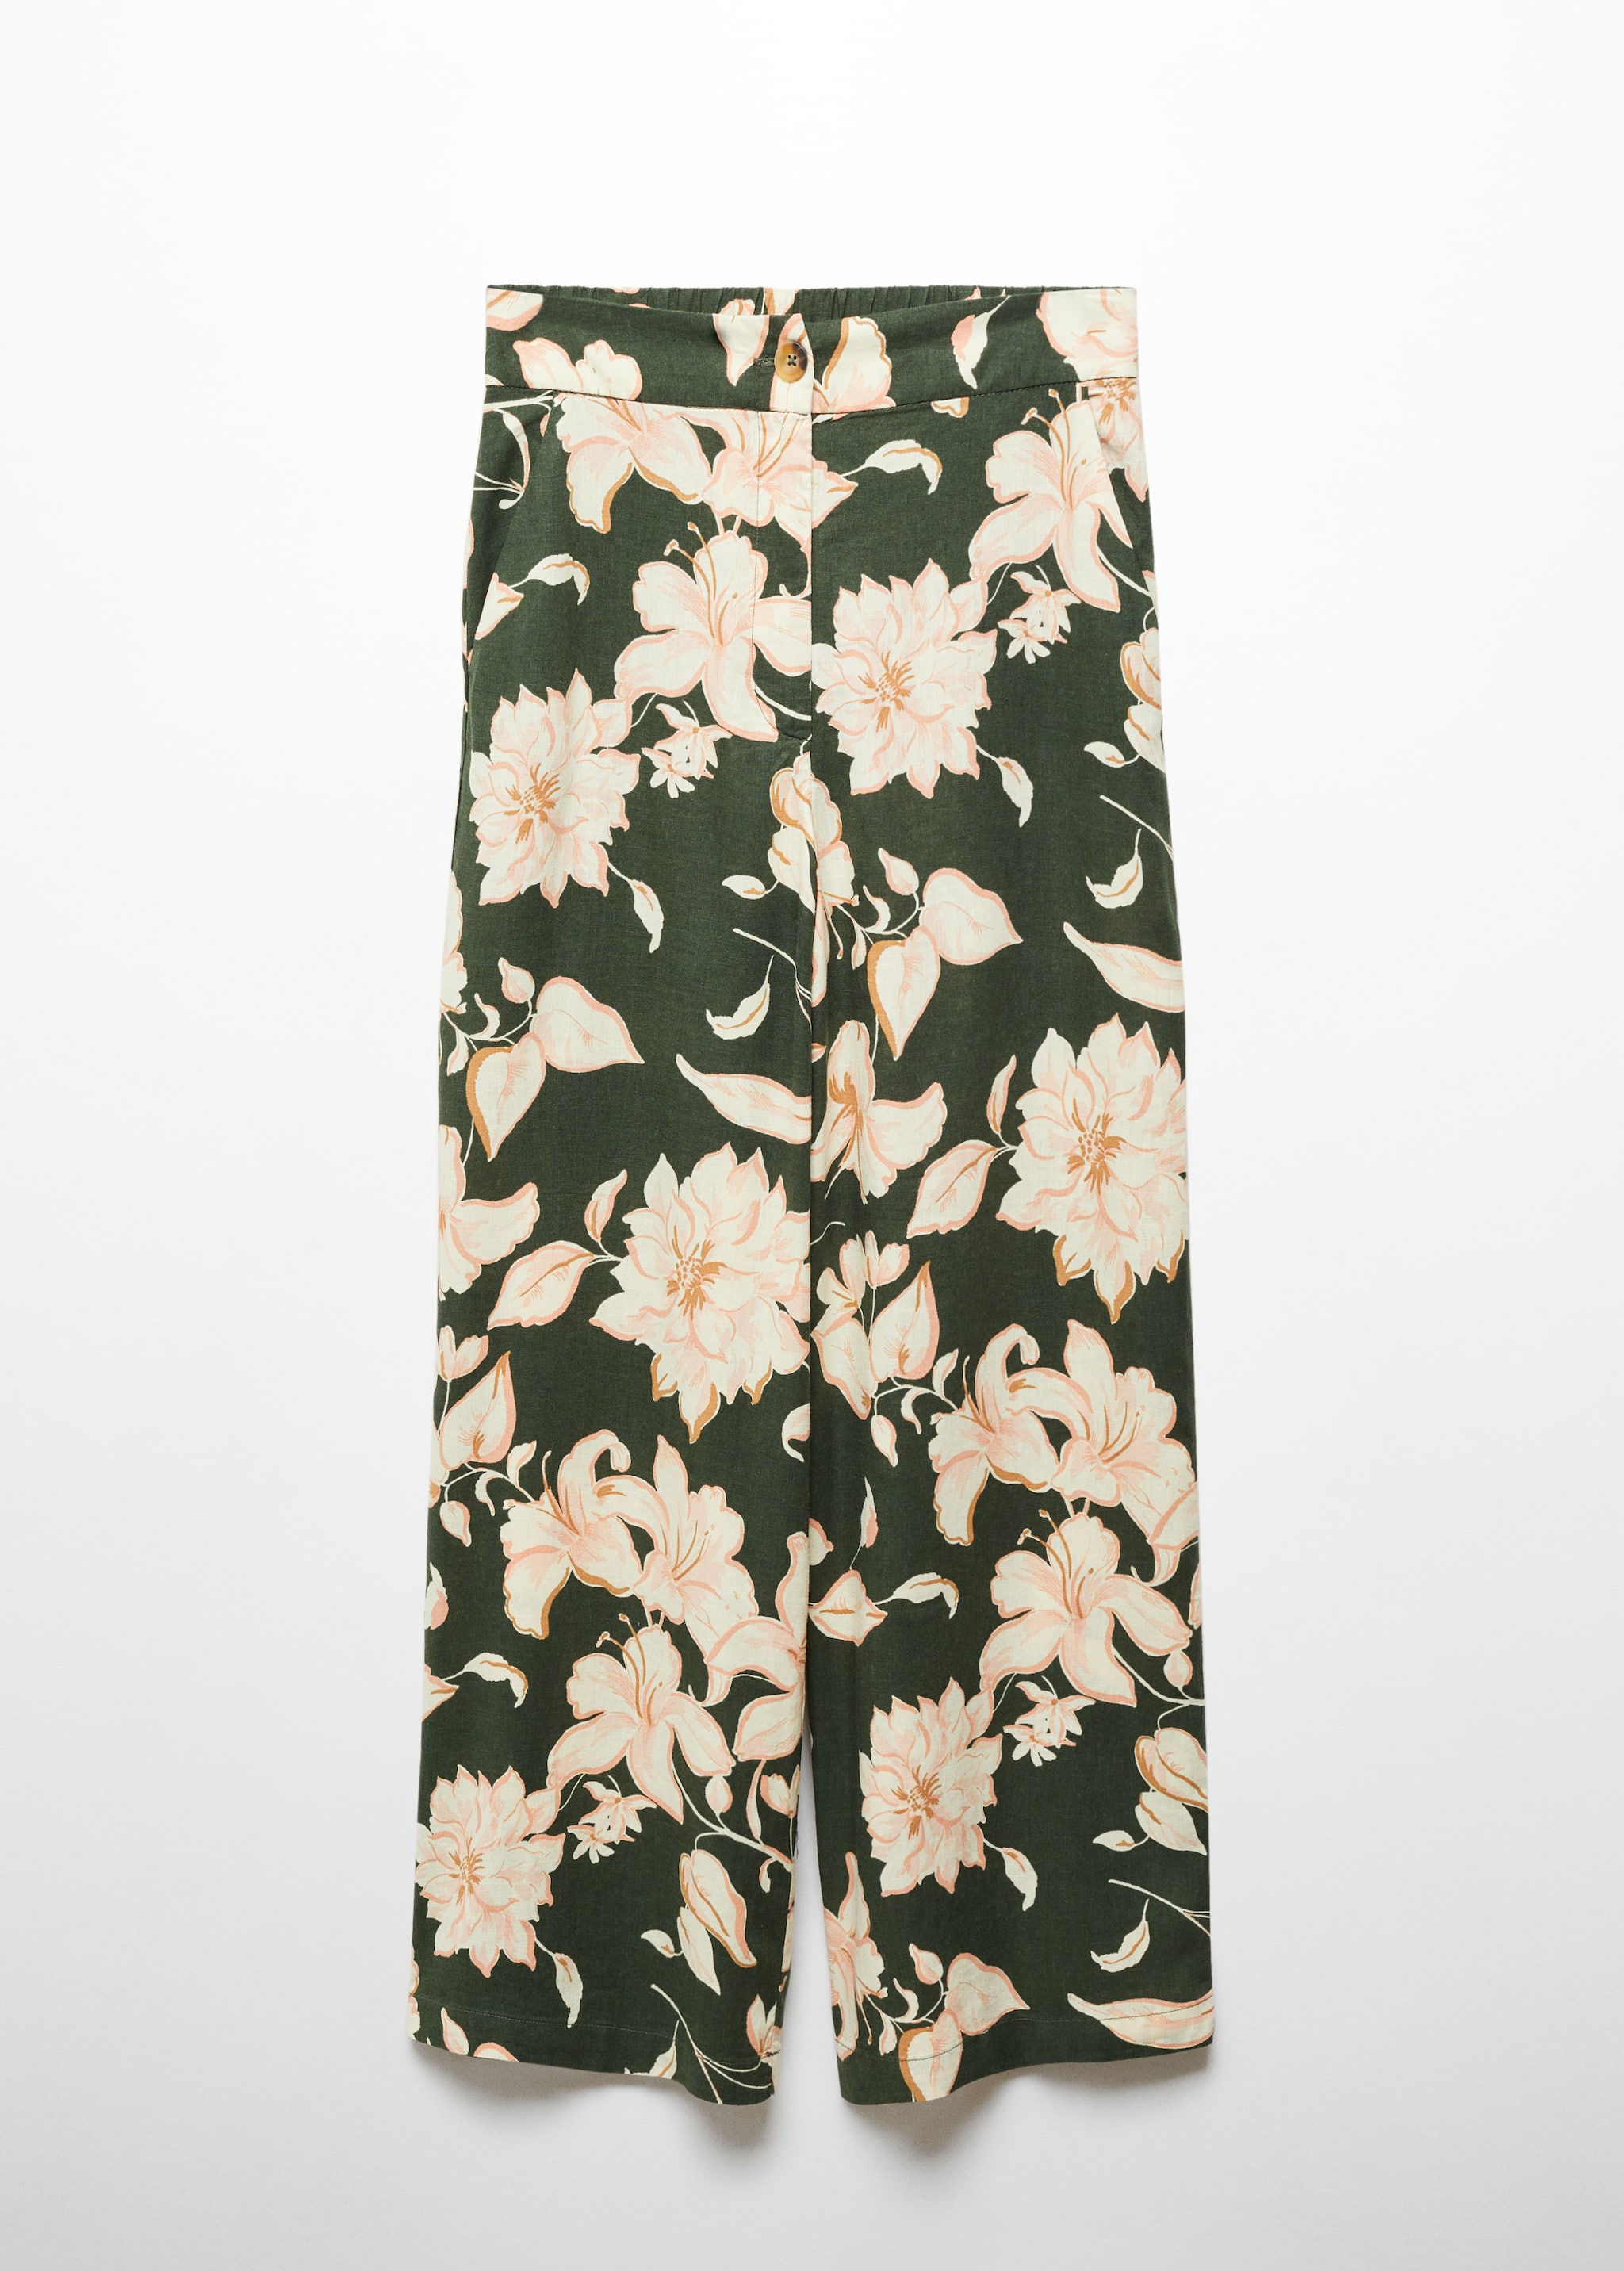 Flower print trousers - Article without model